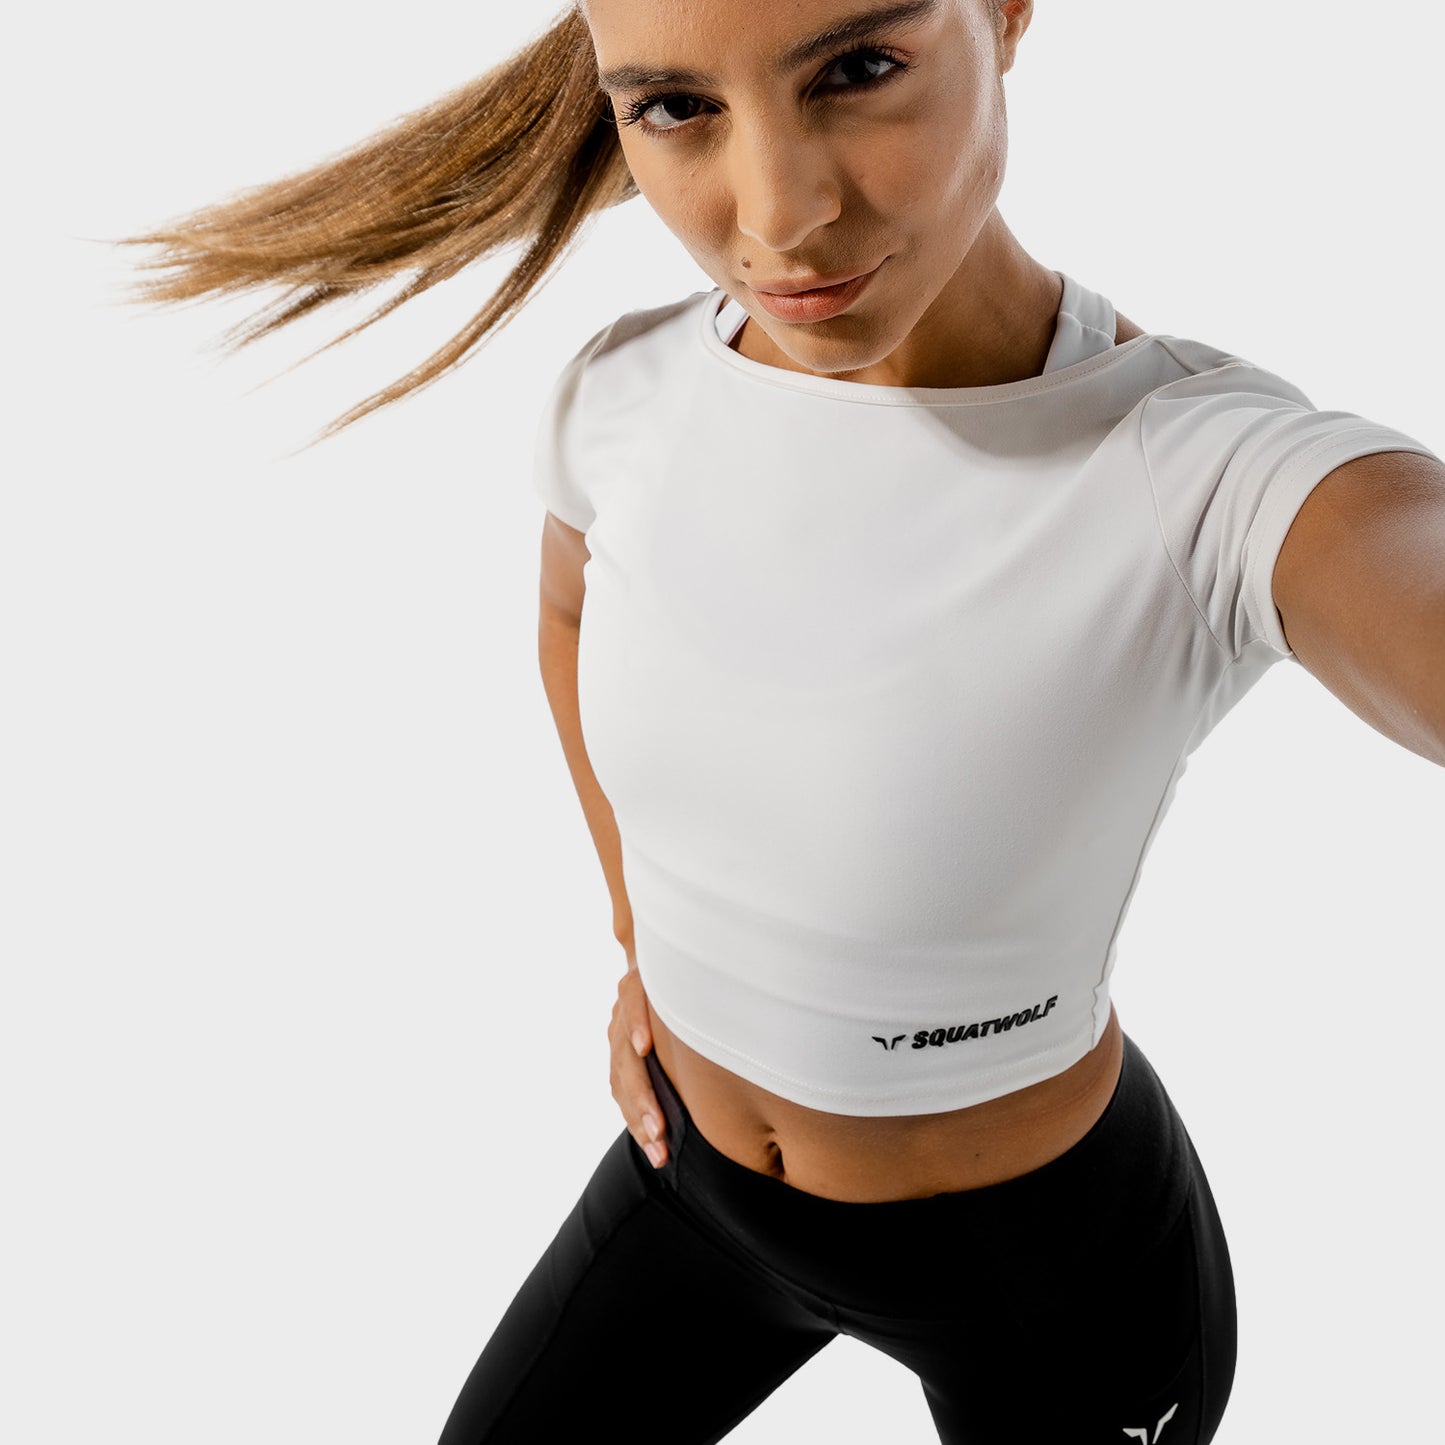 squatwolf-gym-t-shirts-for-women-warrior-crop-tee-half-sleeves-white-workout-clothes